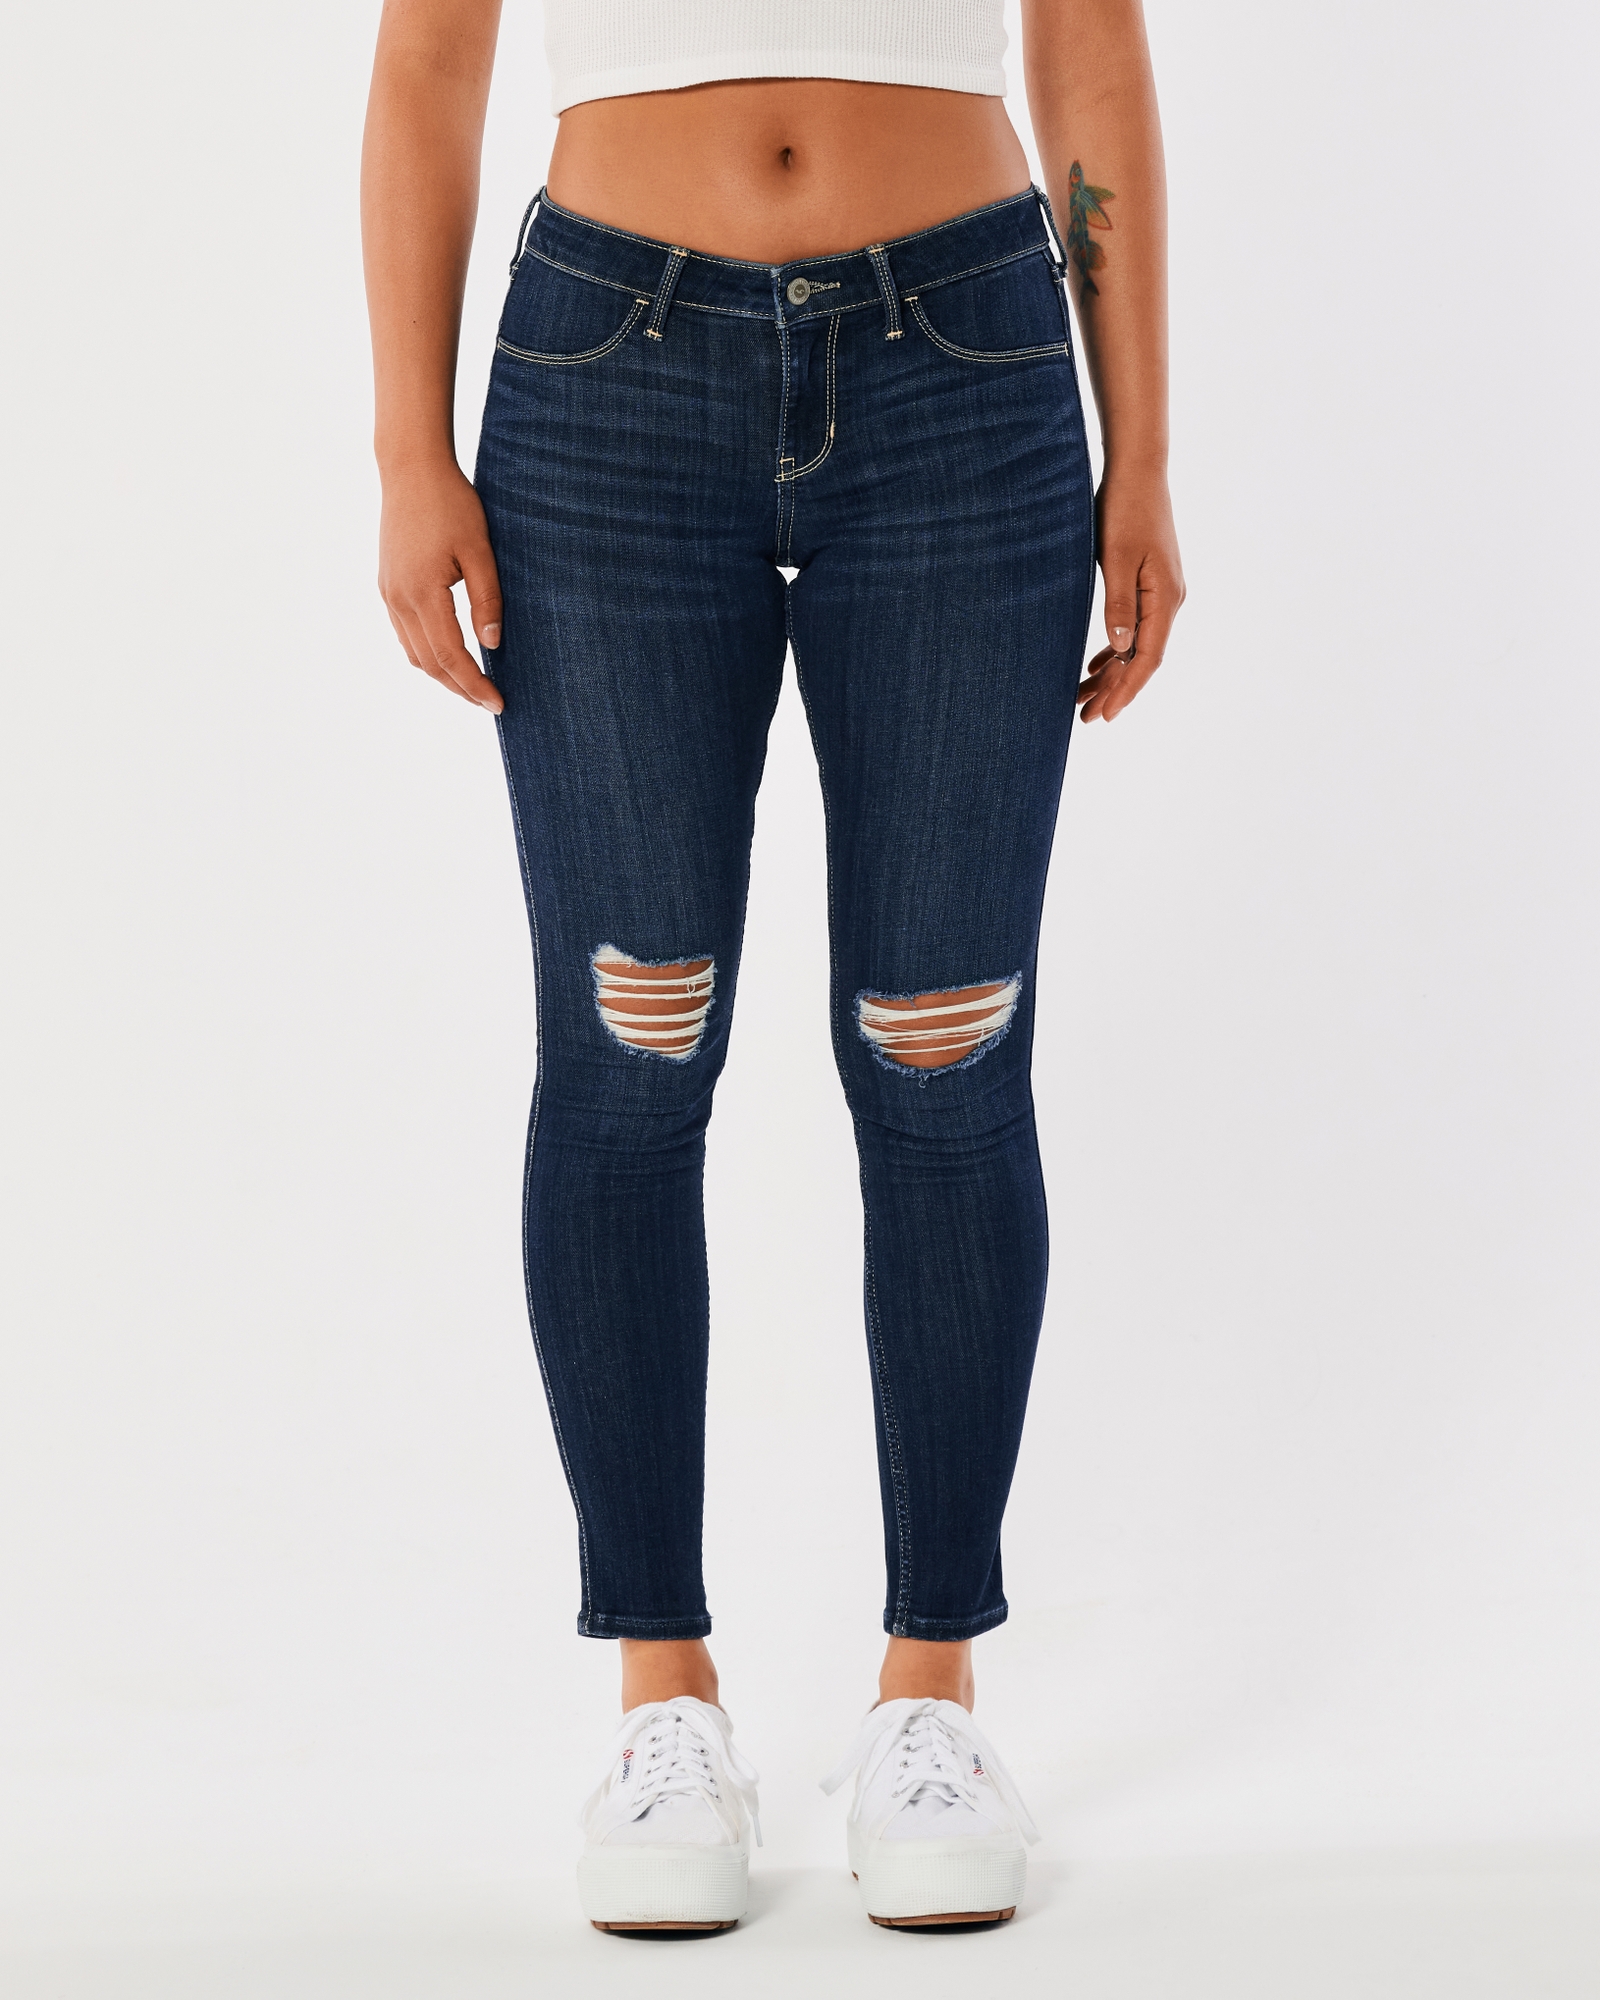 https://img.hollisterco.com/is/image/anf/KIC_355-1271-0678-278_model2.jpg?policy=product-extra-large